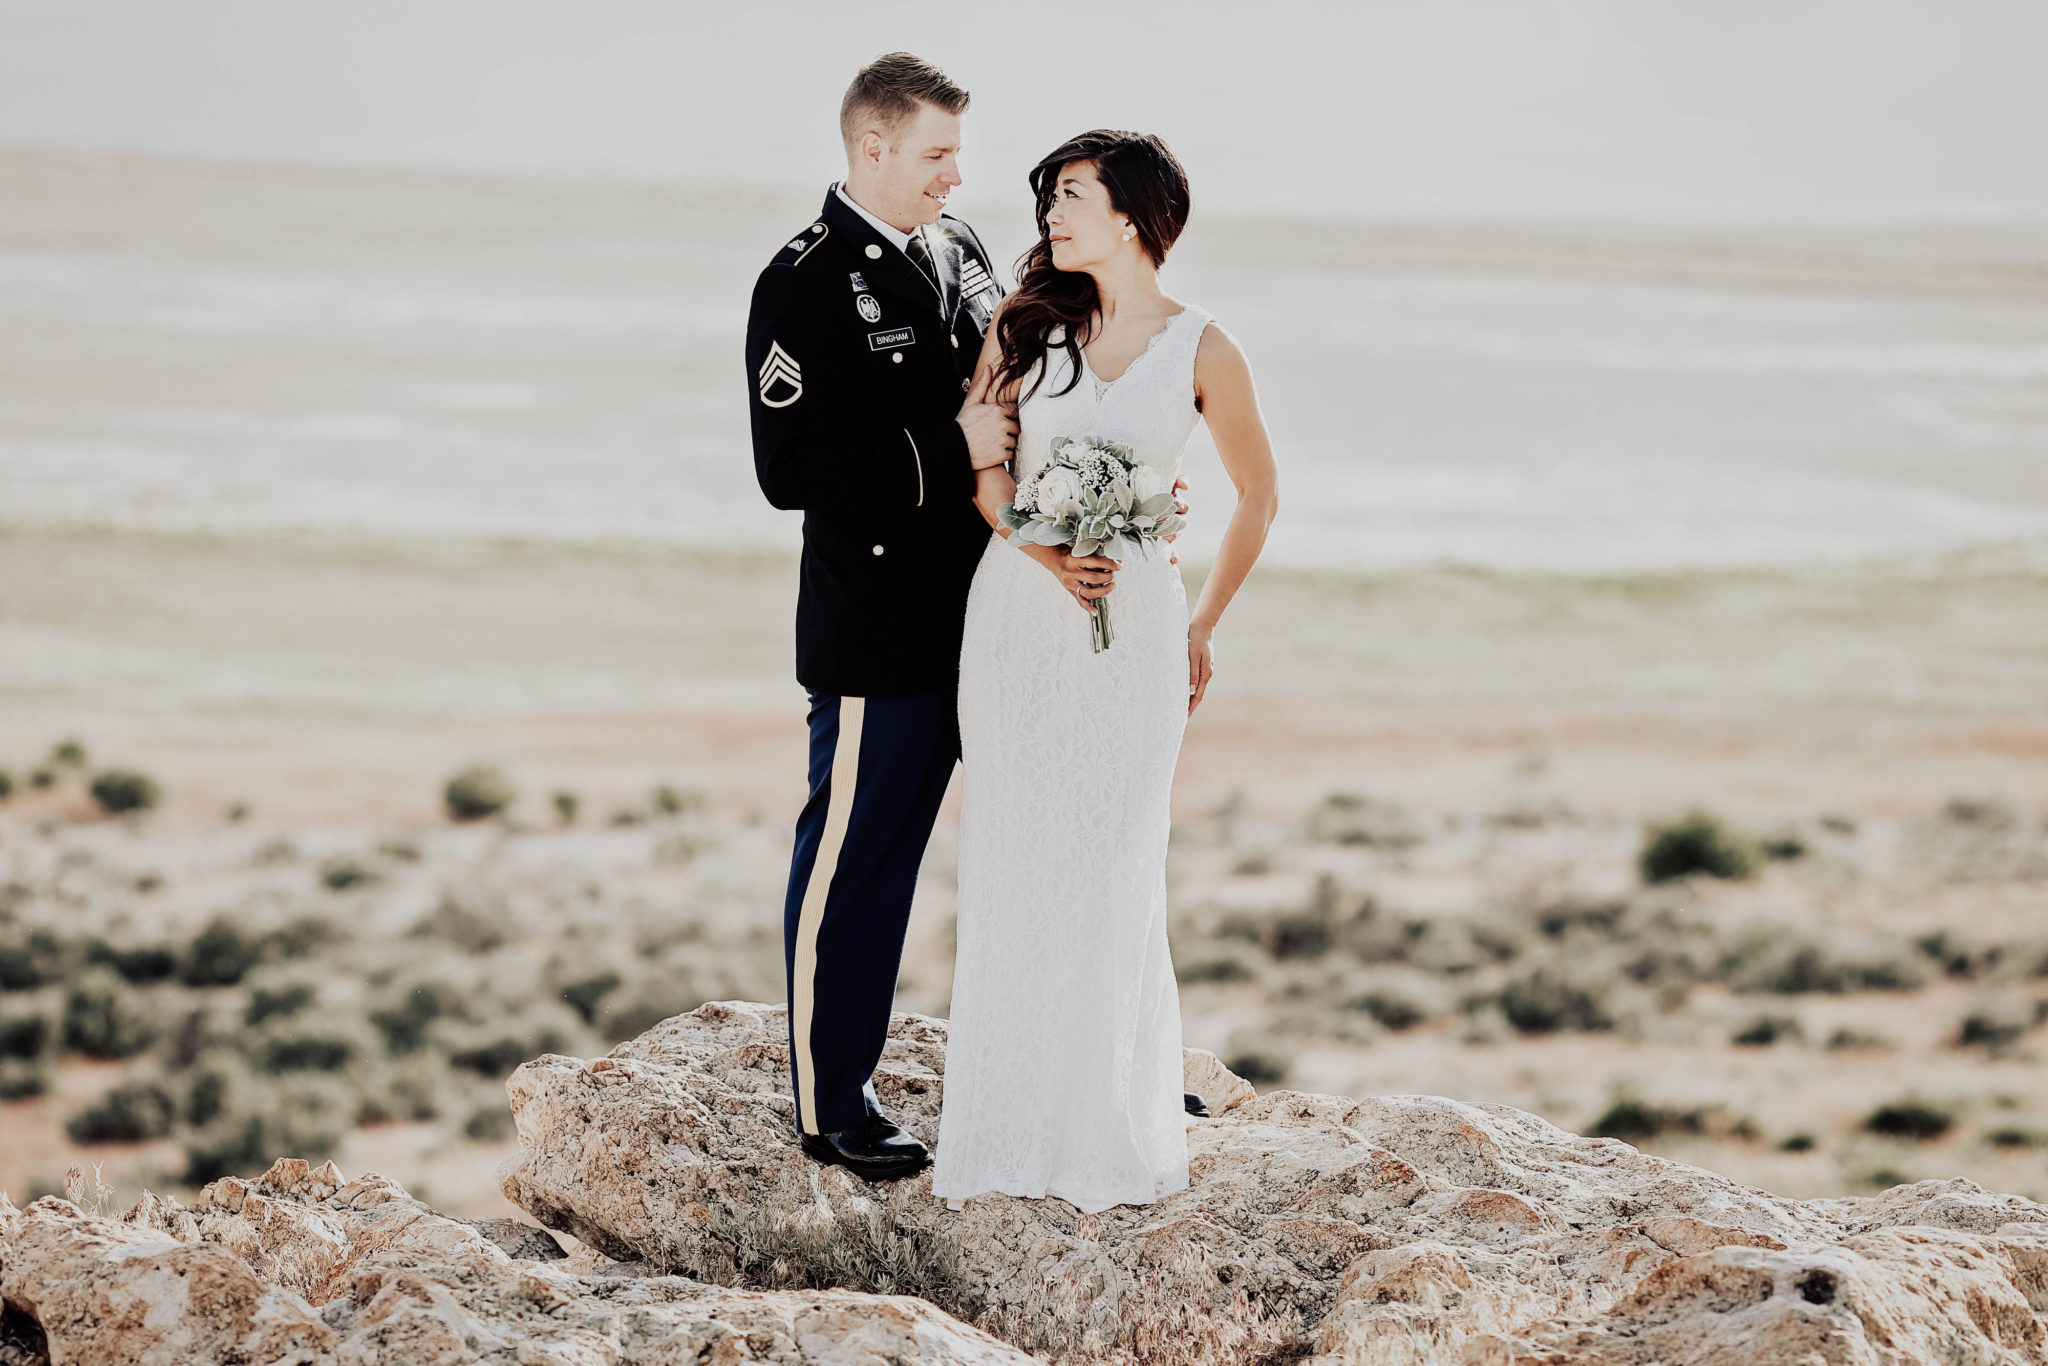 What Makes a U.S. Military Wedding Different from Other Weddings